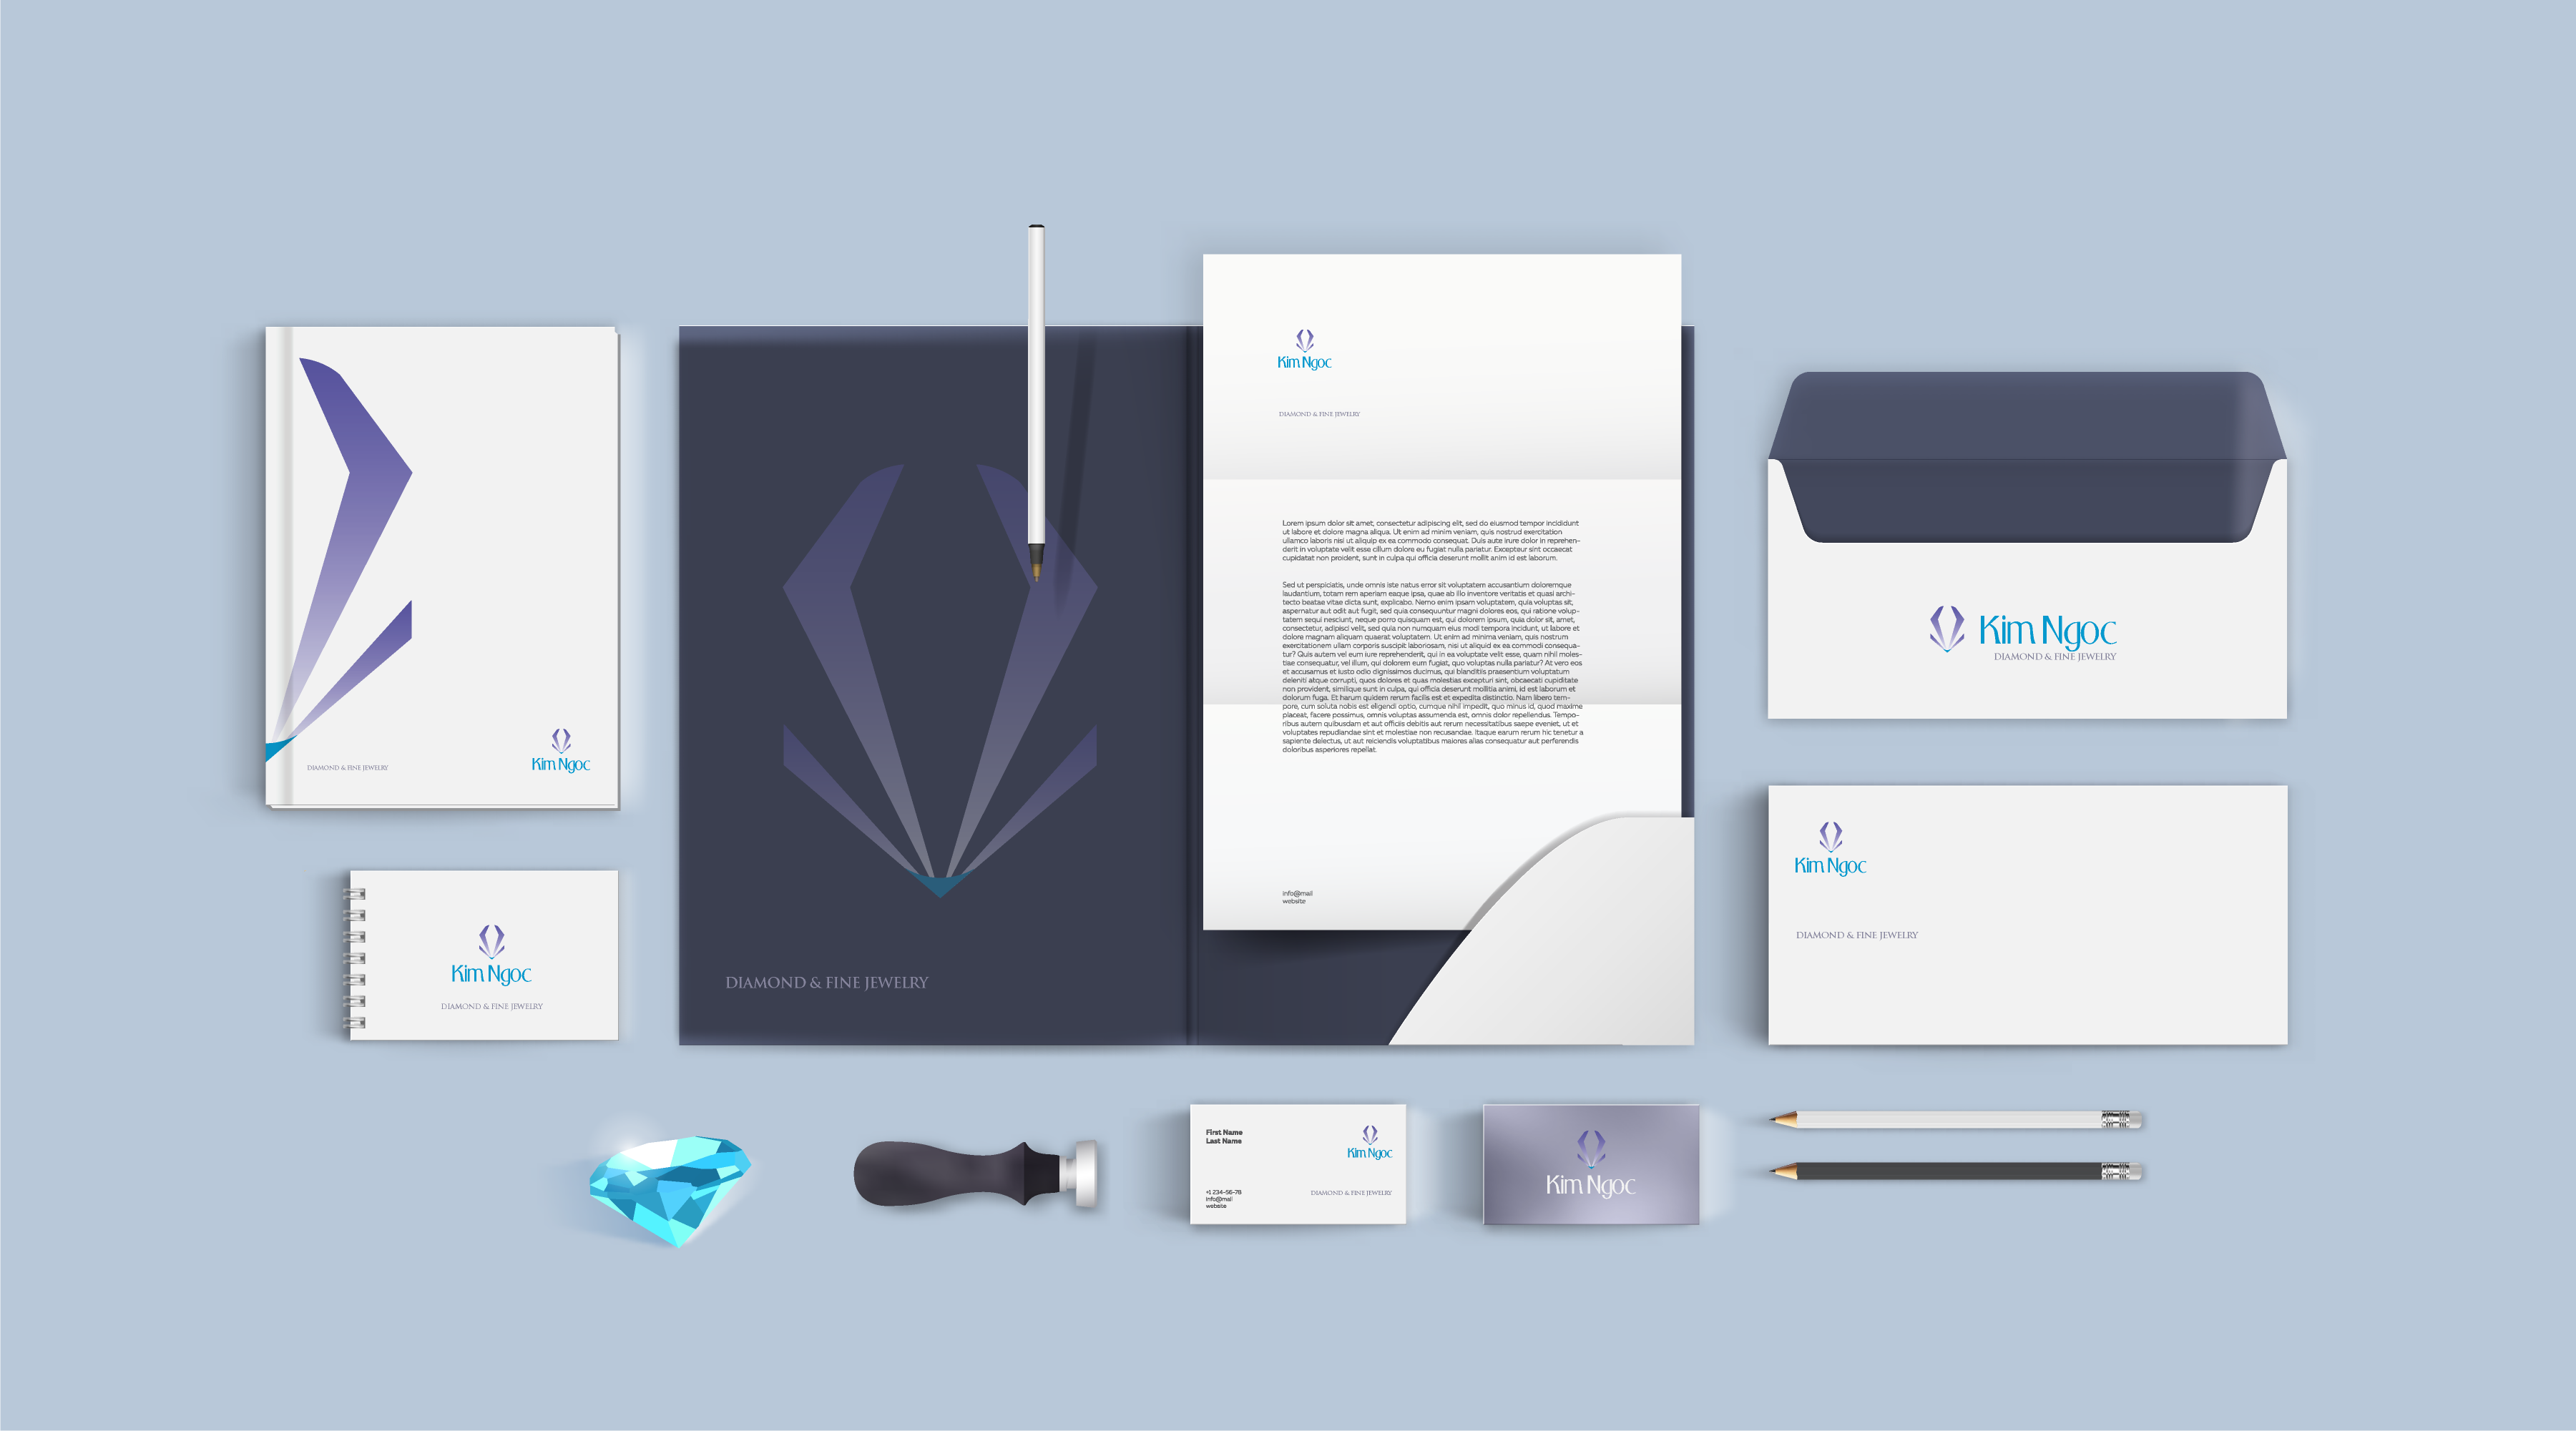 Apercher Marketing Solutions for jewelry store logo design - Kim Ngoc Diamond & Fine Jewelry Stationary Design for business cards, letterheads, and envelopes